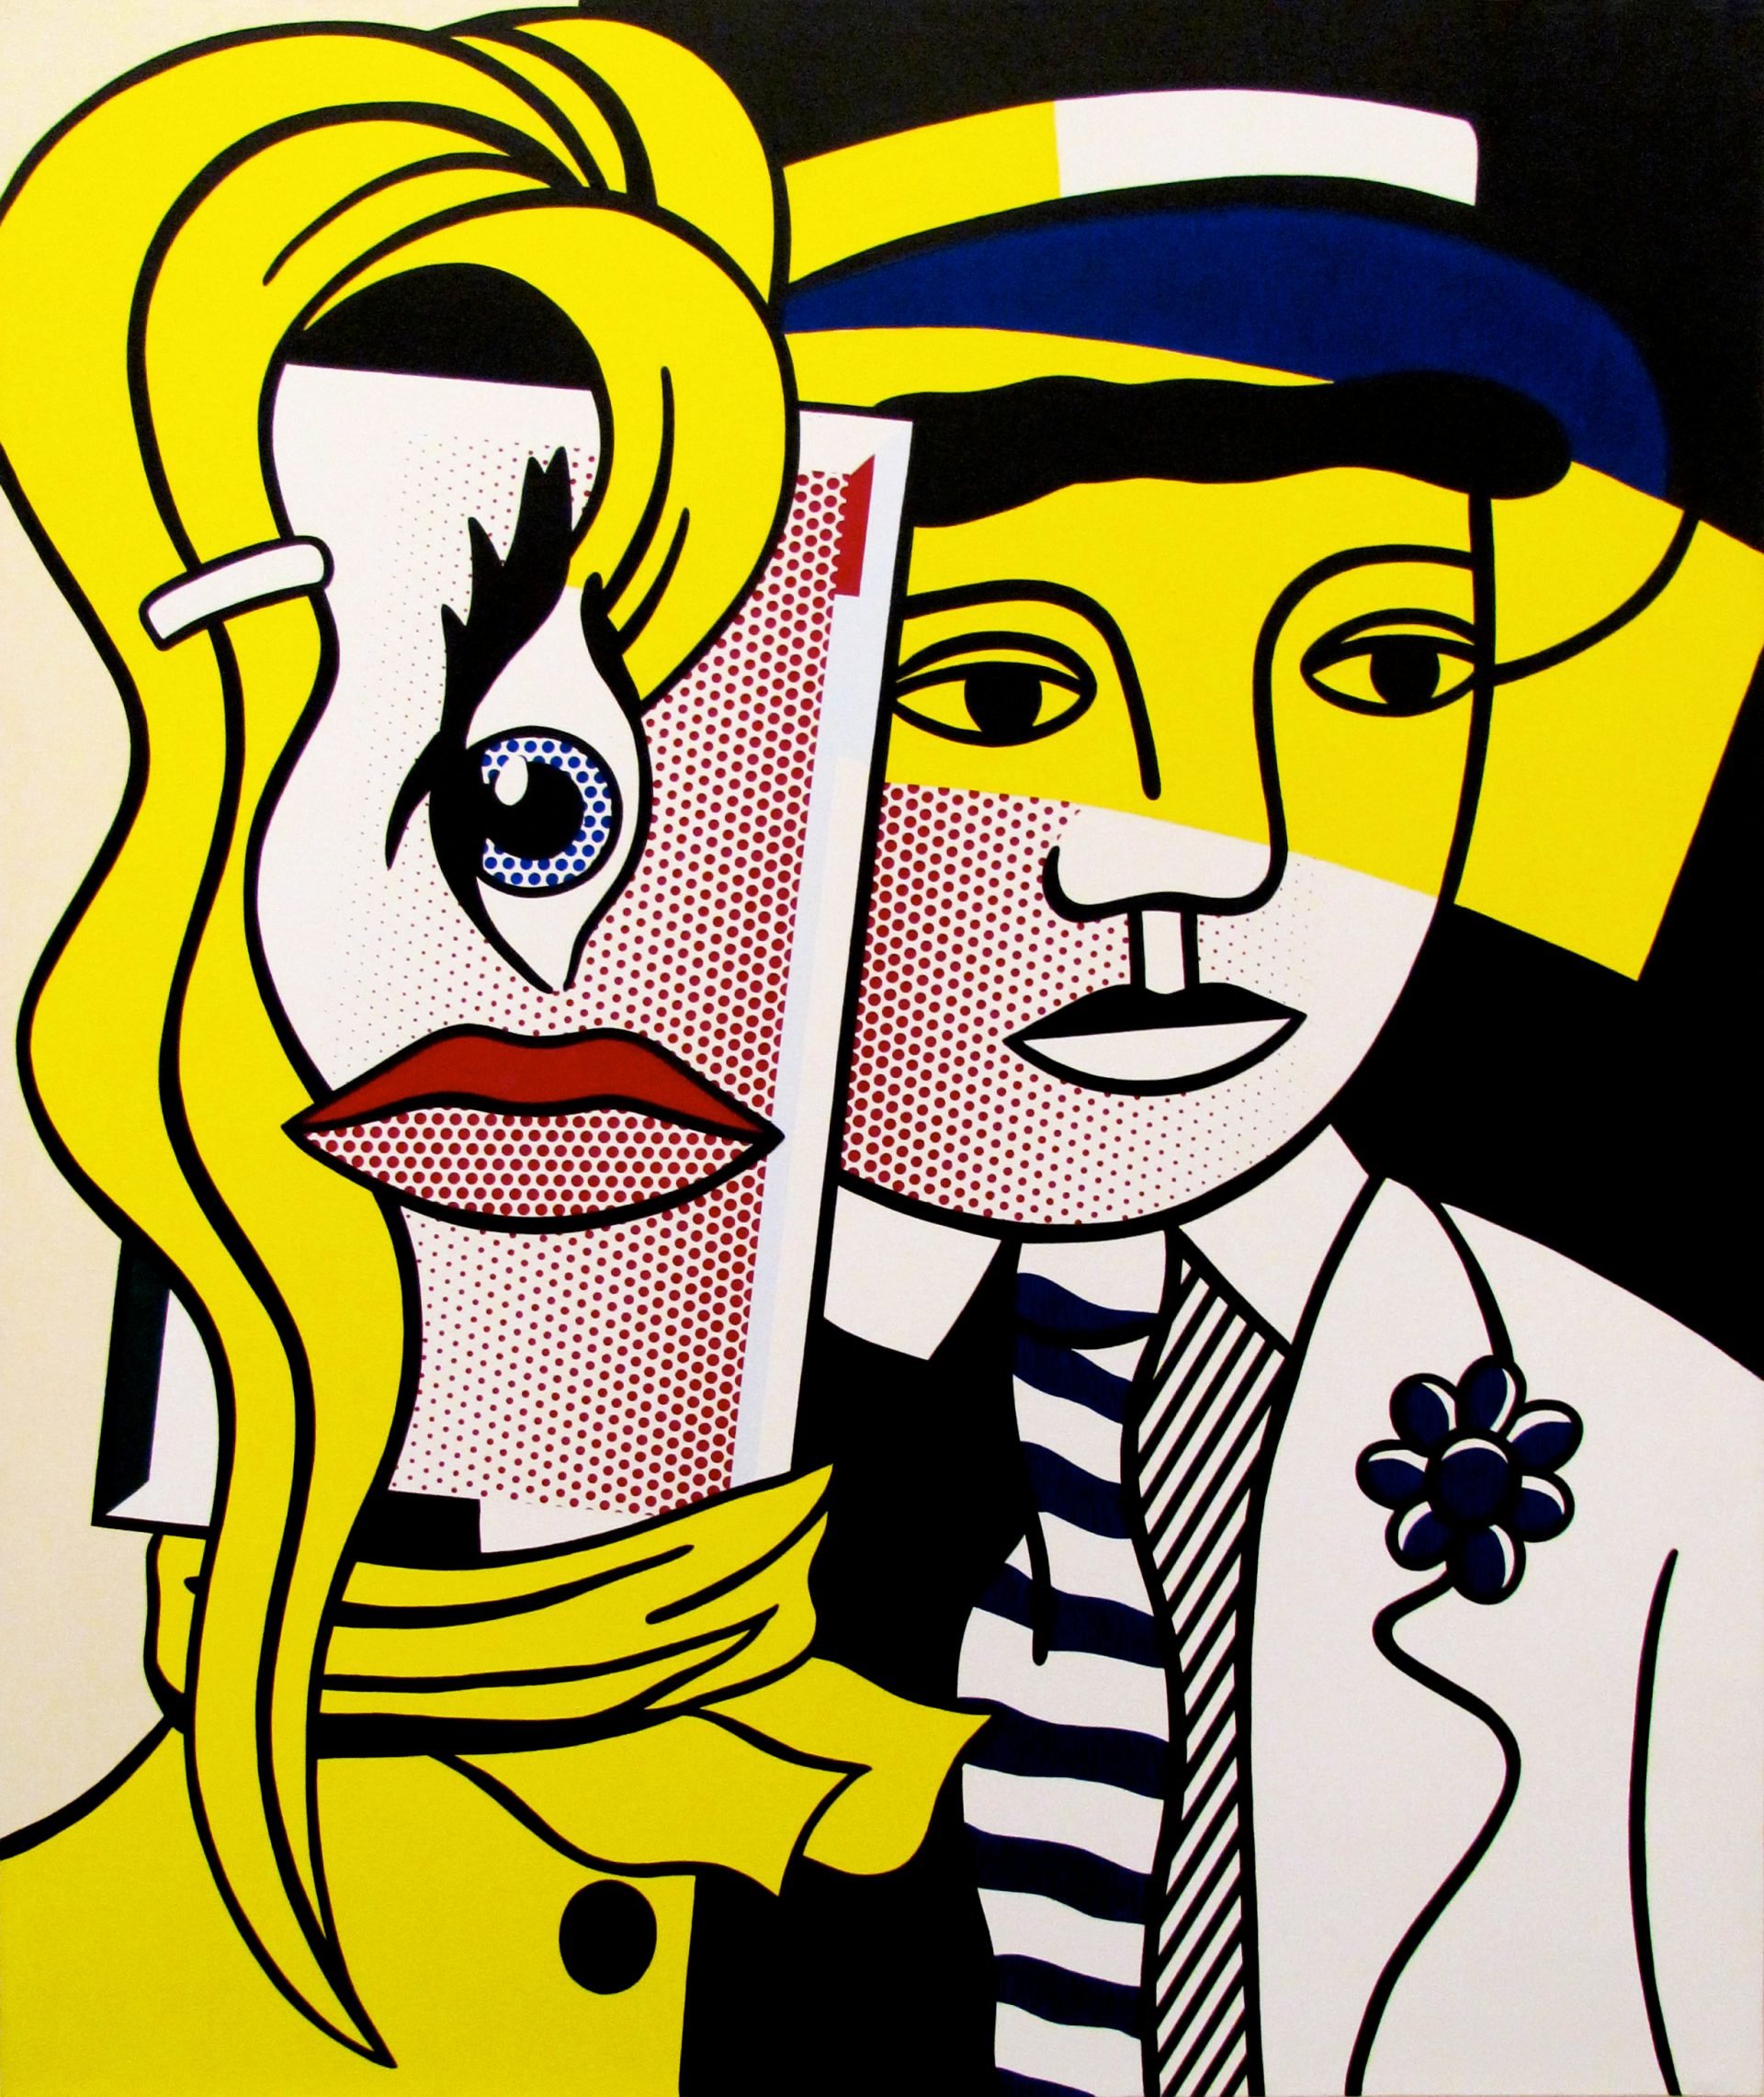 Pop art piece 'Stepping Out' by Roy Lichtenstein, 1978. The artwork juxtaposes a man's face and a woman's surrealistically rendered face, reminiscent of Picasso's 1930s women. The woman has a distinct dot pattern, a side-set eye, red lips, and cascading blond hair. The man wears a blue hat and striped tie, captured in Lichtenstein's signature bold lines and vibrant colors.